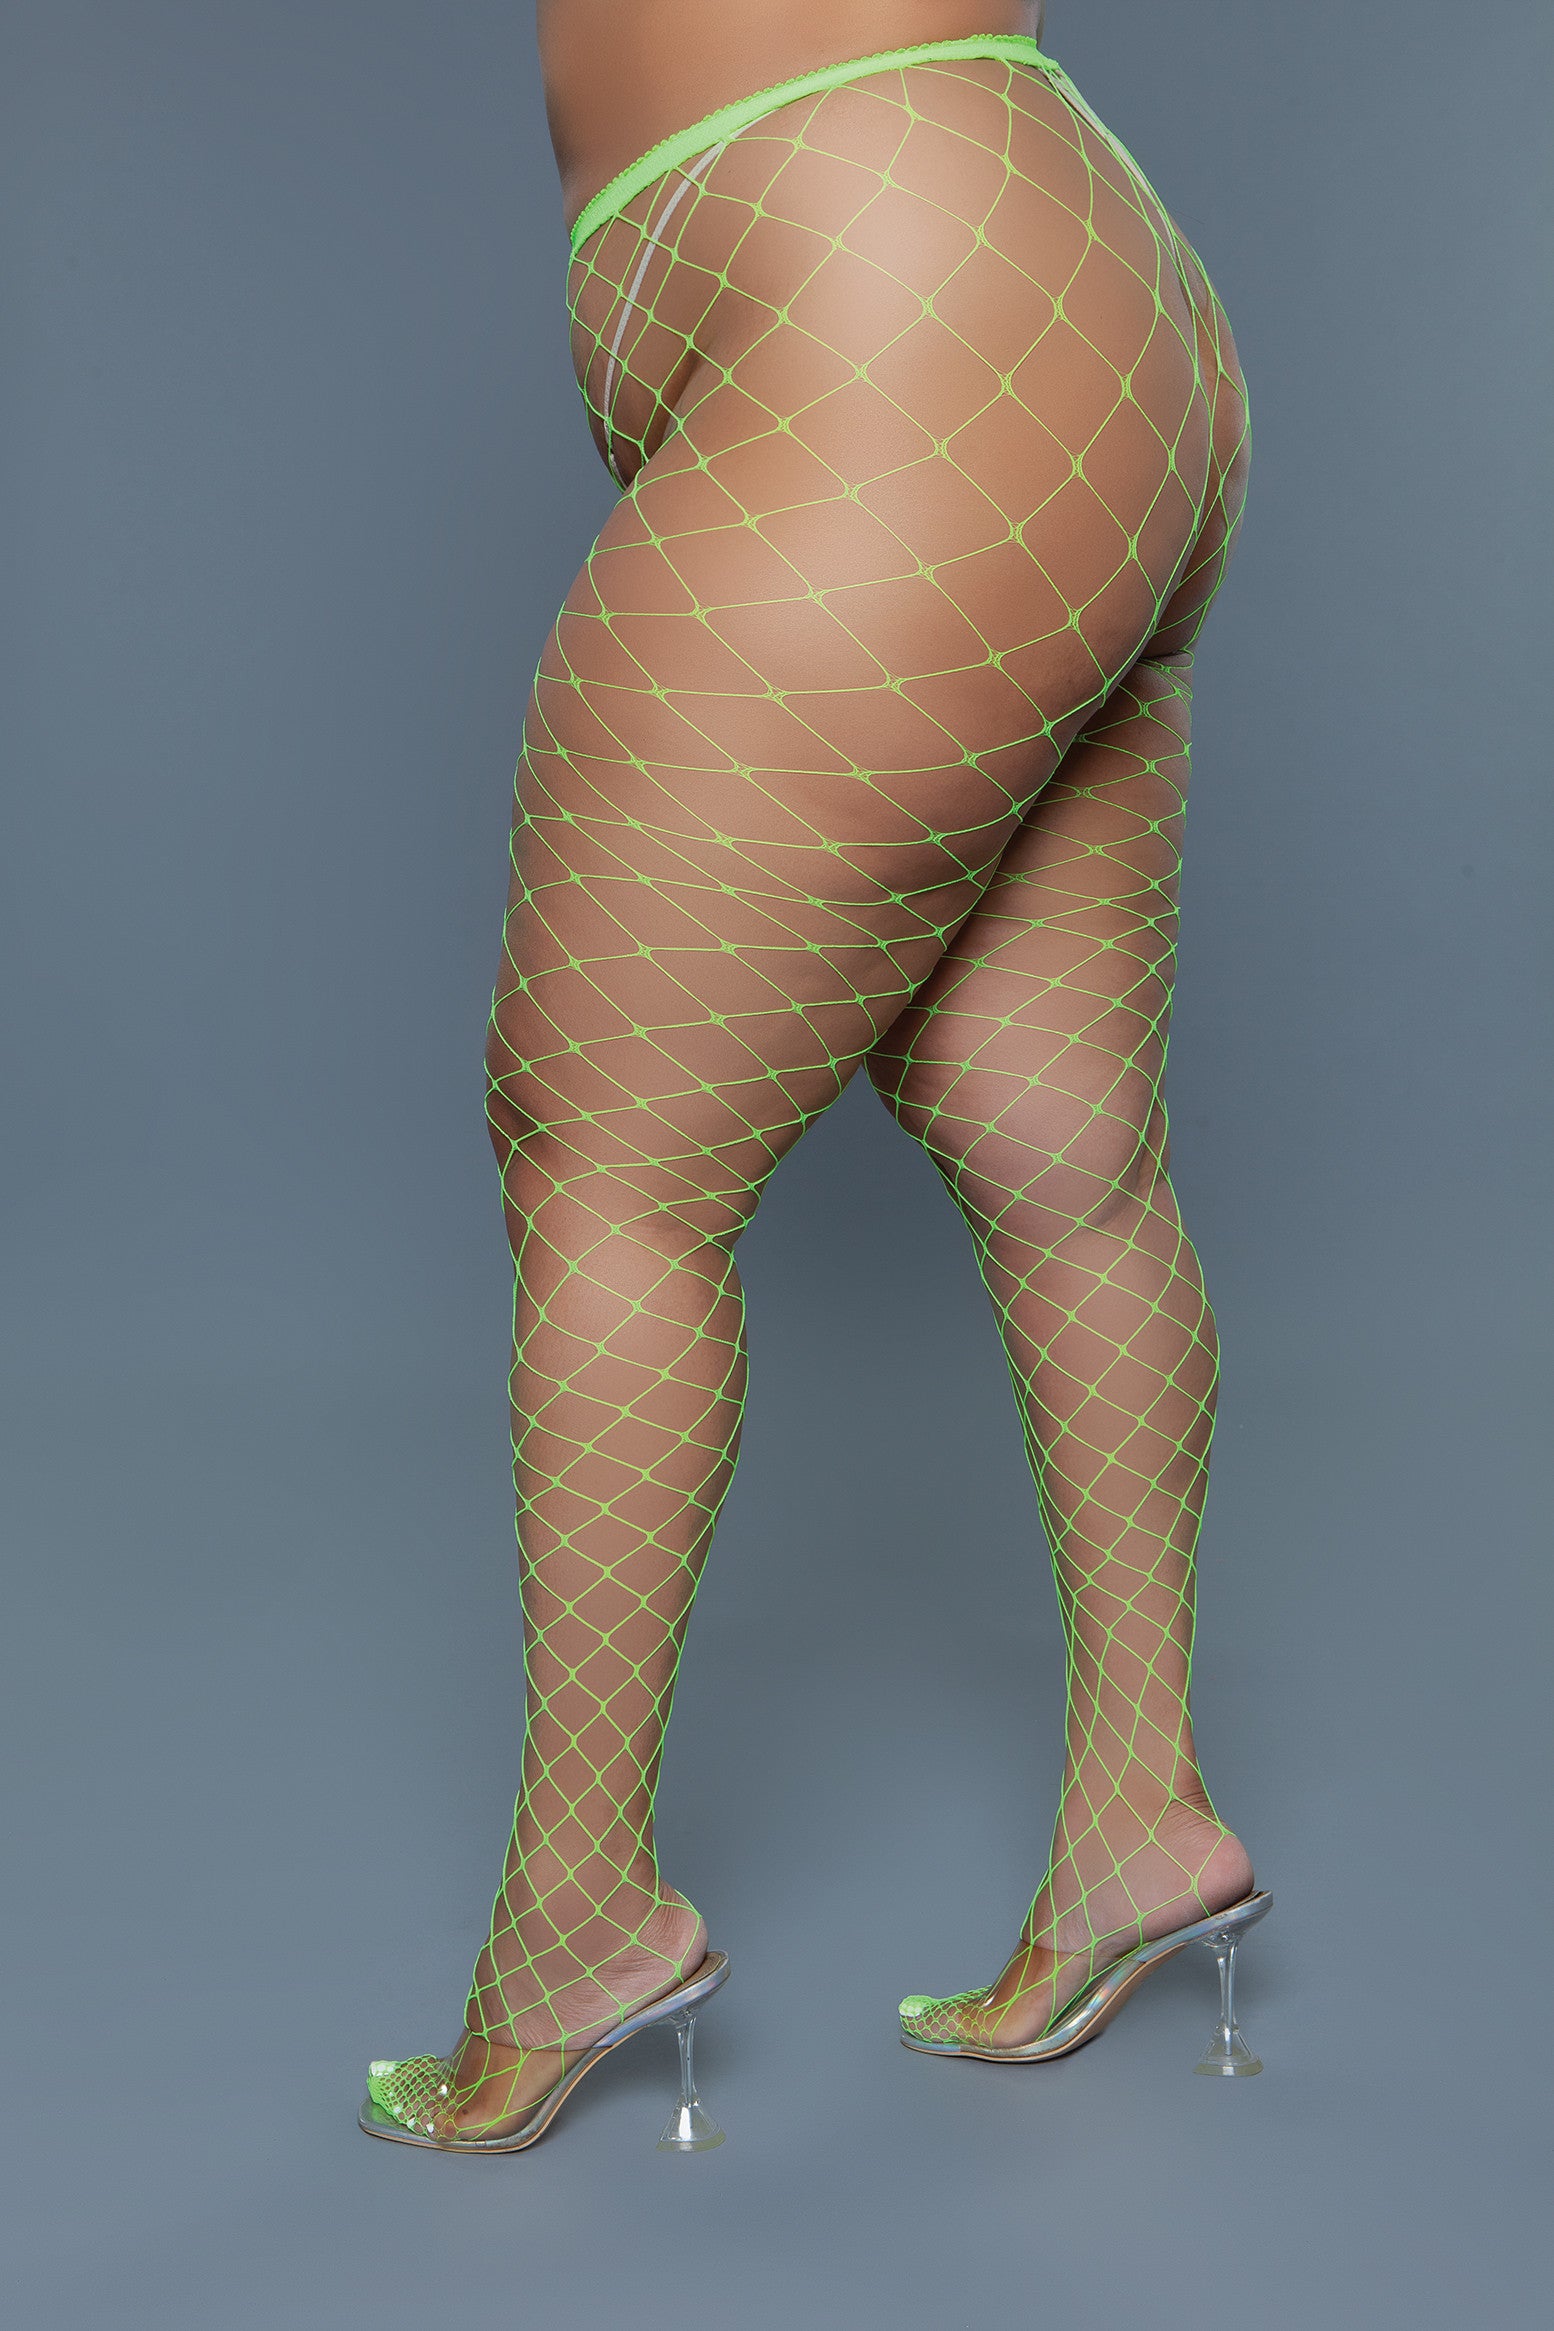 Oversized Fishnet Pantyhose - Queen Size -  All Colors